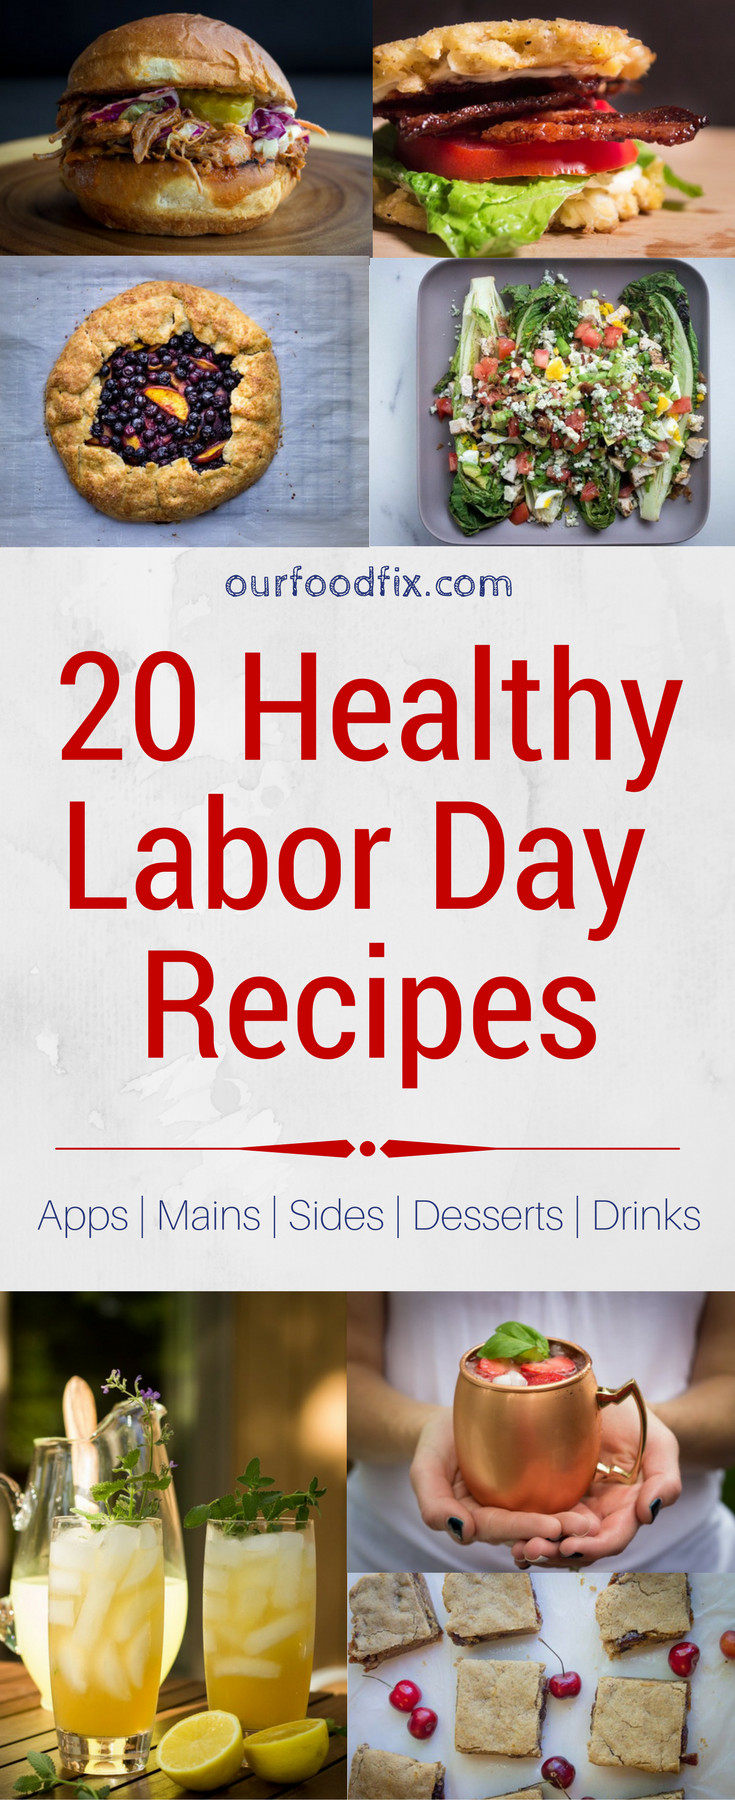 Labor Day Cookout Ideas
 Recipe Roundup 20 Healthy Labor Day Cookout Favorites